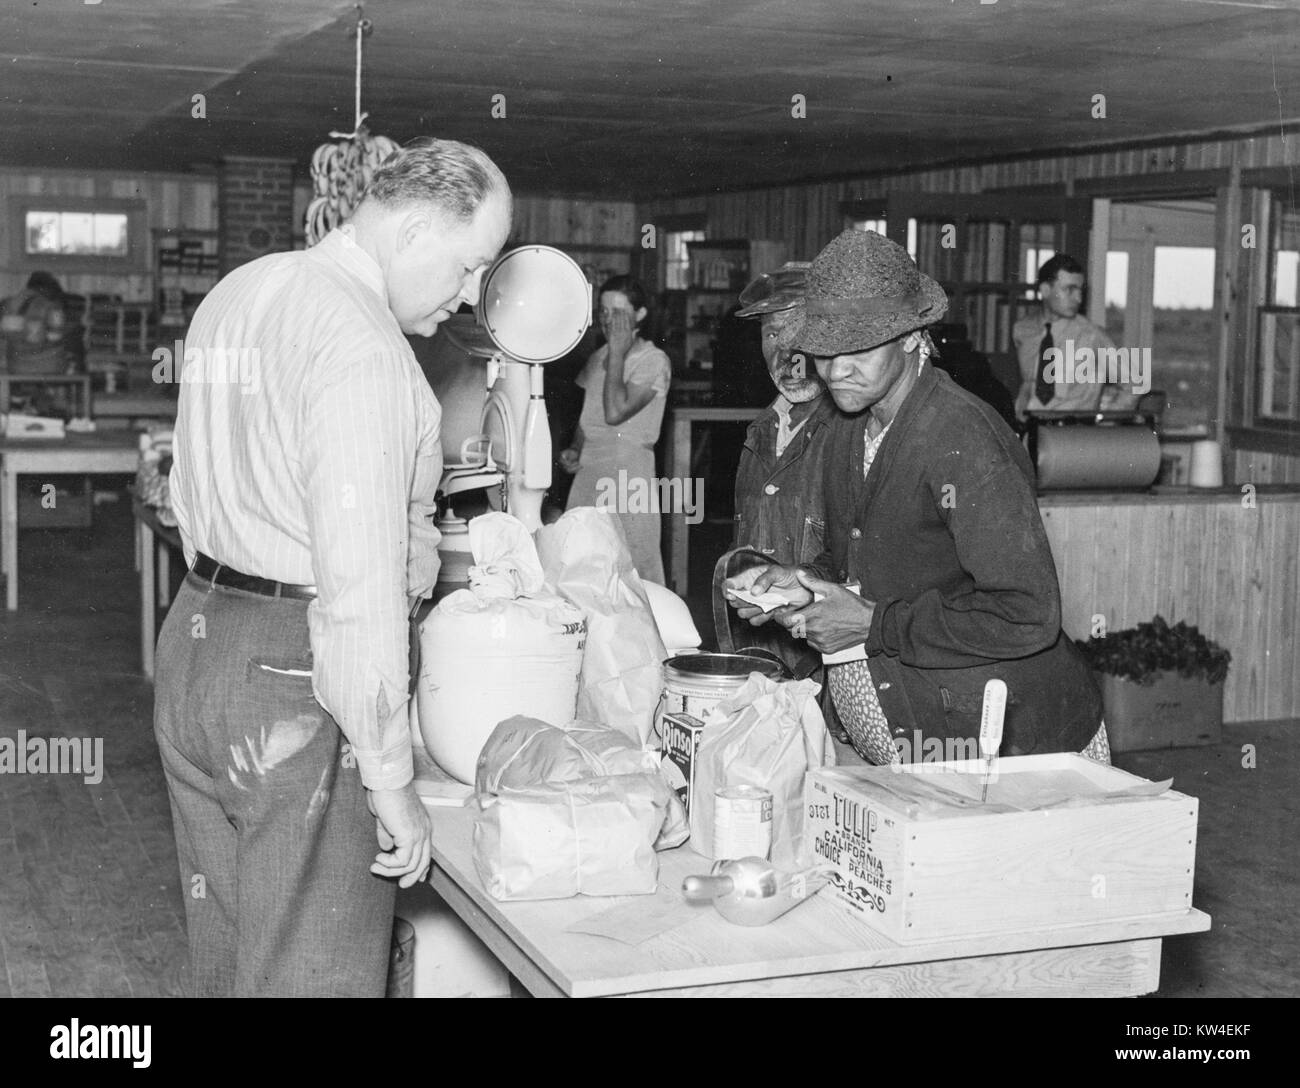 Men look at various goods for sale at a cooperative store in La Forge, Missouri, May, 1938. From the New York Public Library. Stock Photo